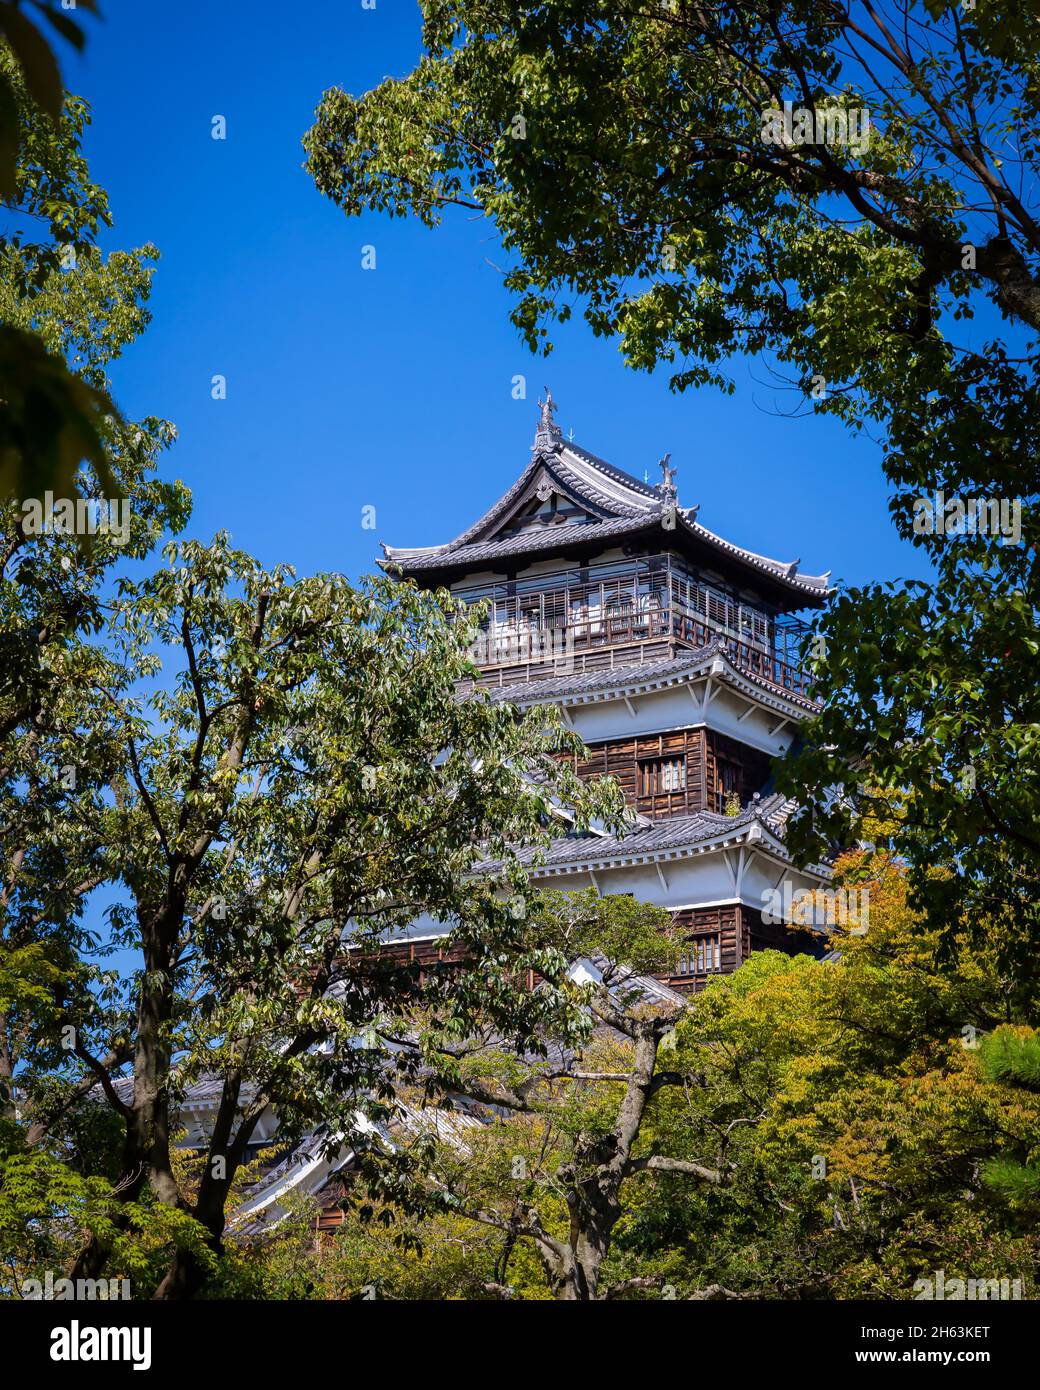 Looking through the trees at the Hiroshima Castle, the original was destroyed by the 1945 atomic bombing and this 16th century replica was built in 19 Stock Photo